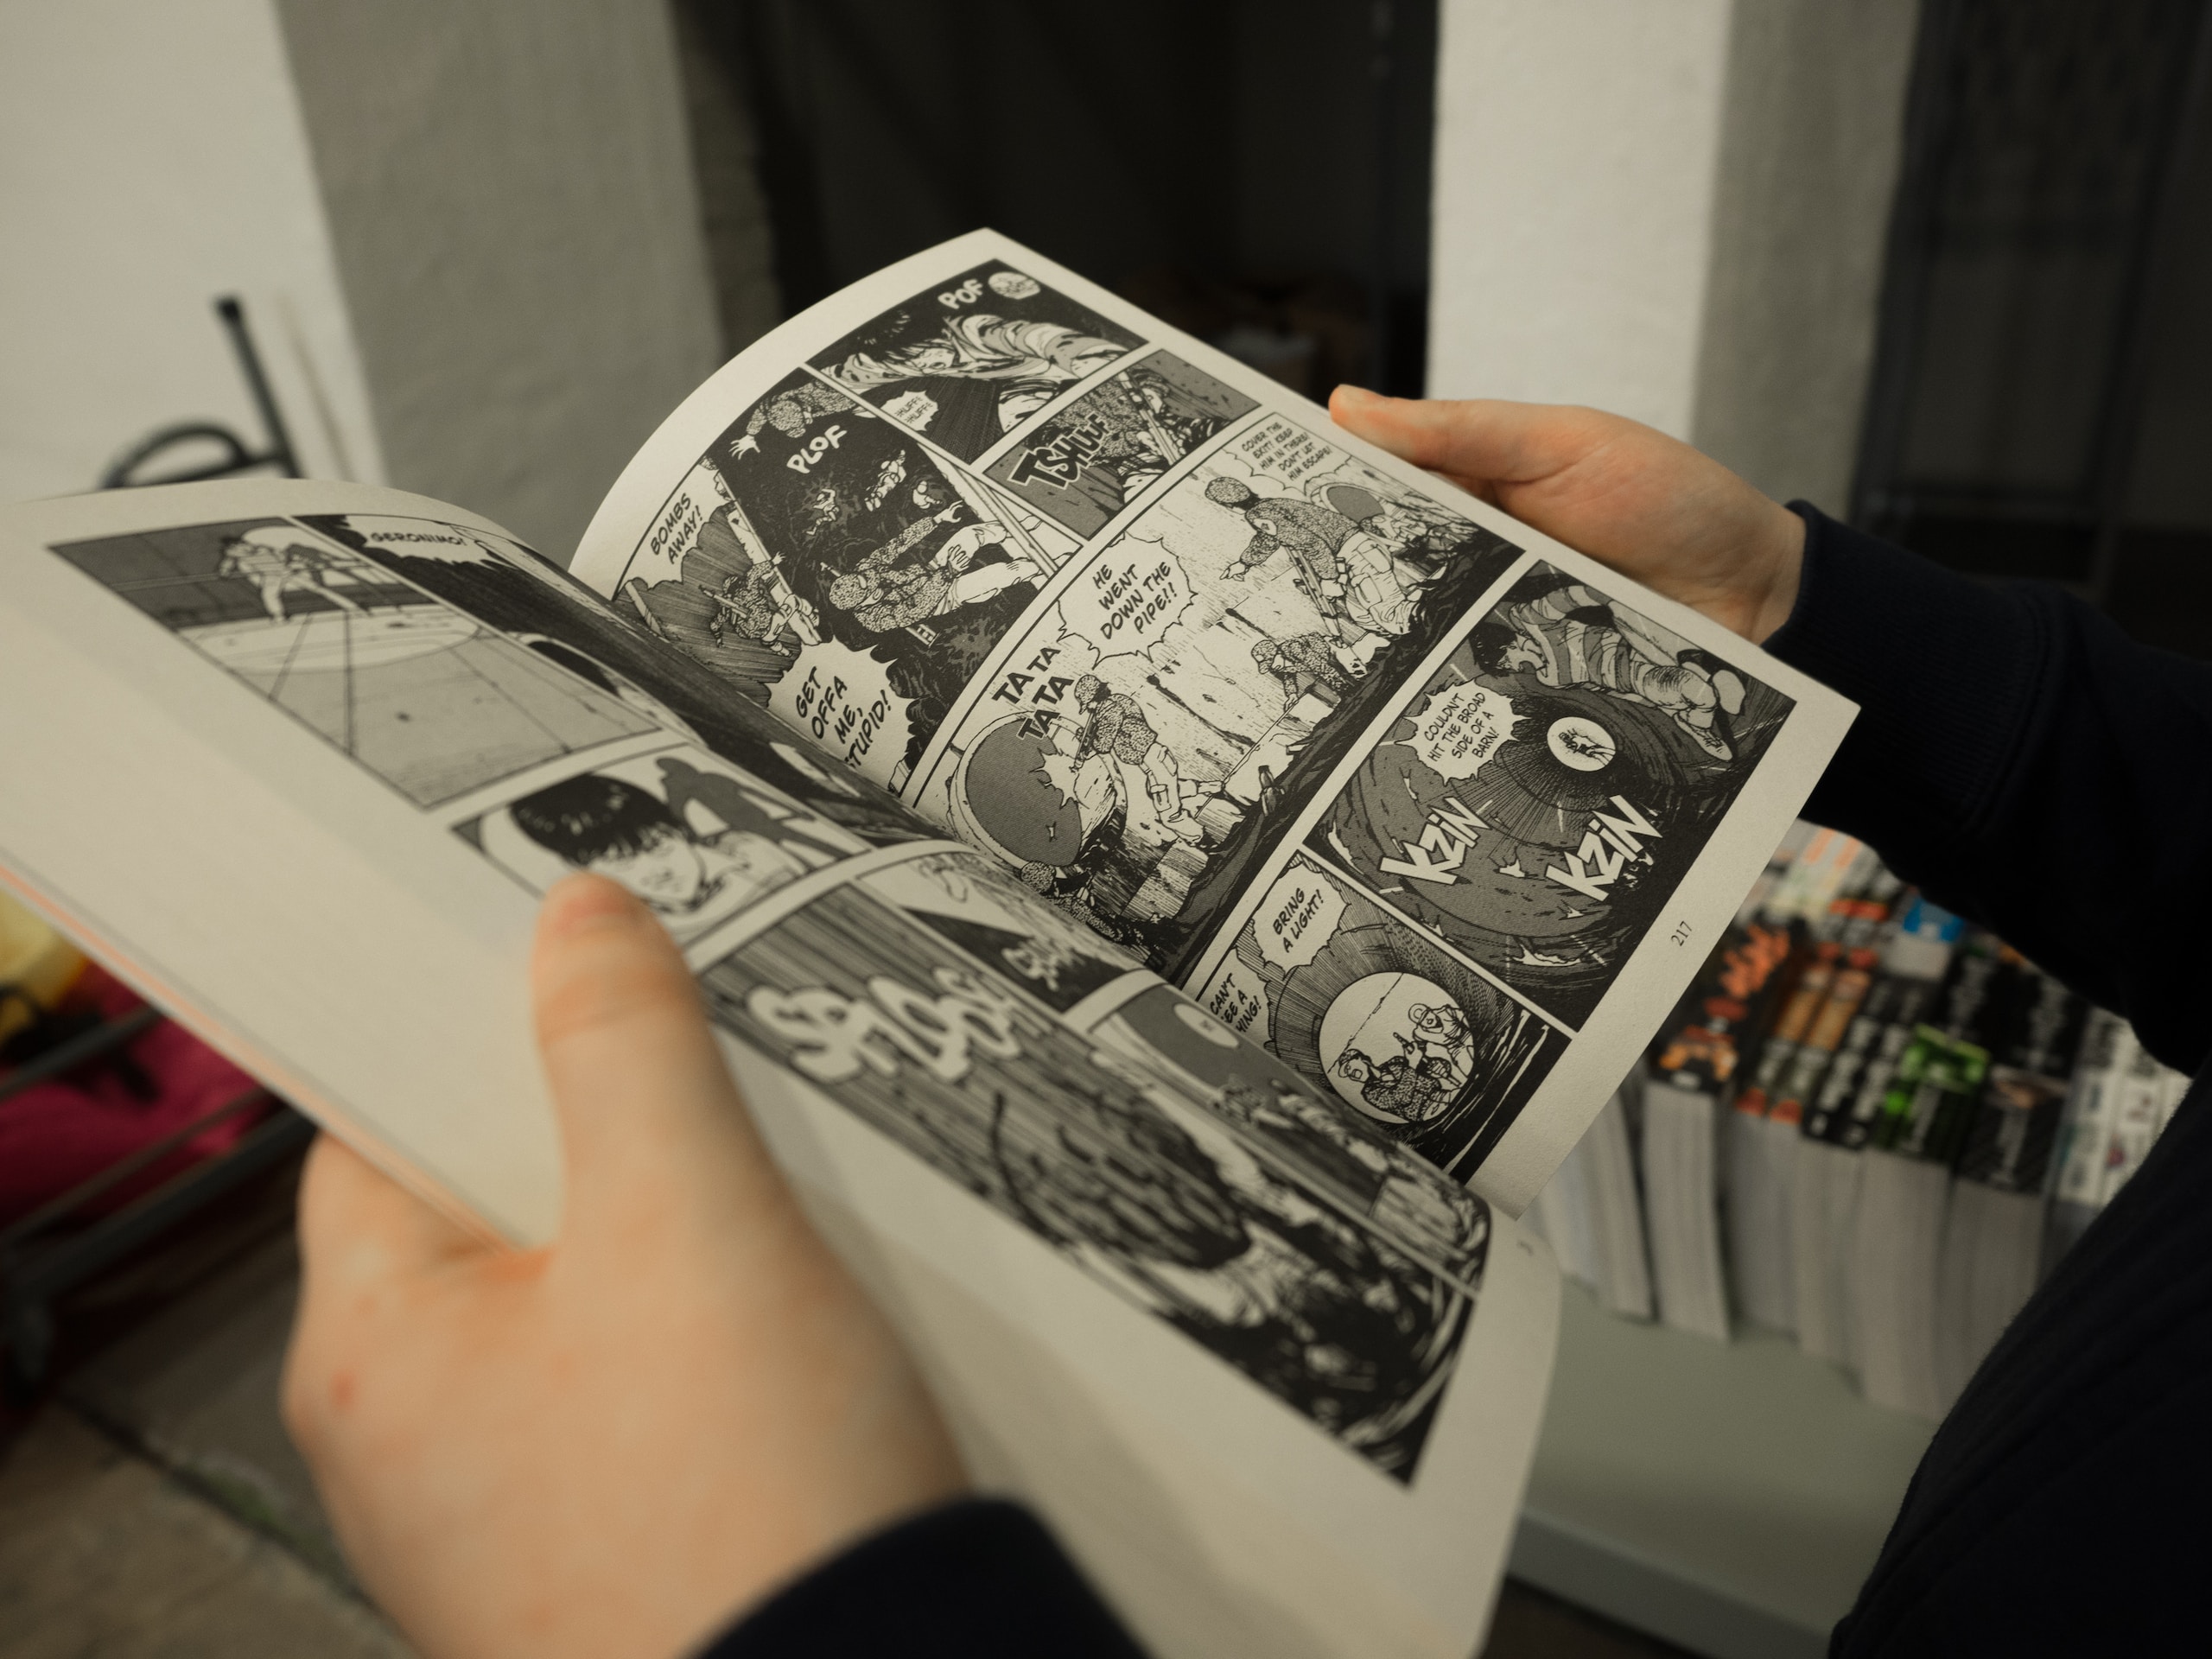 a phot of a person holding an opened manga volume